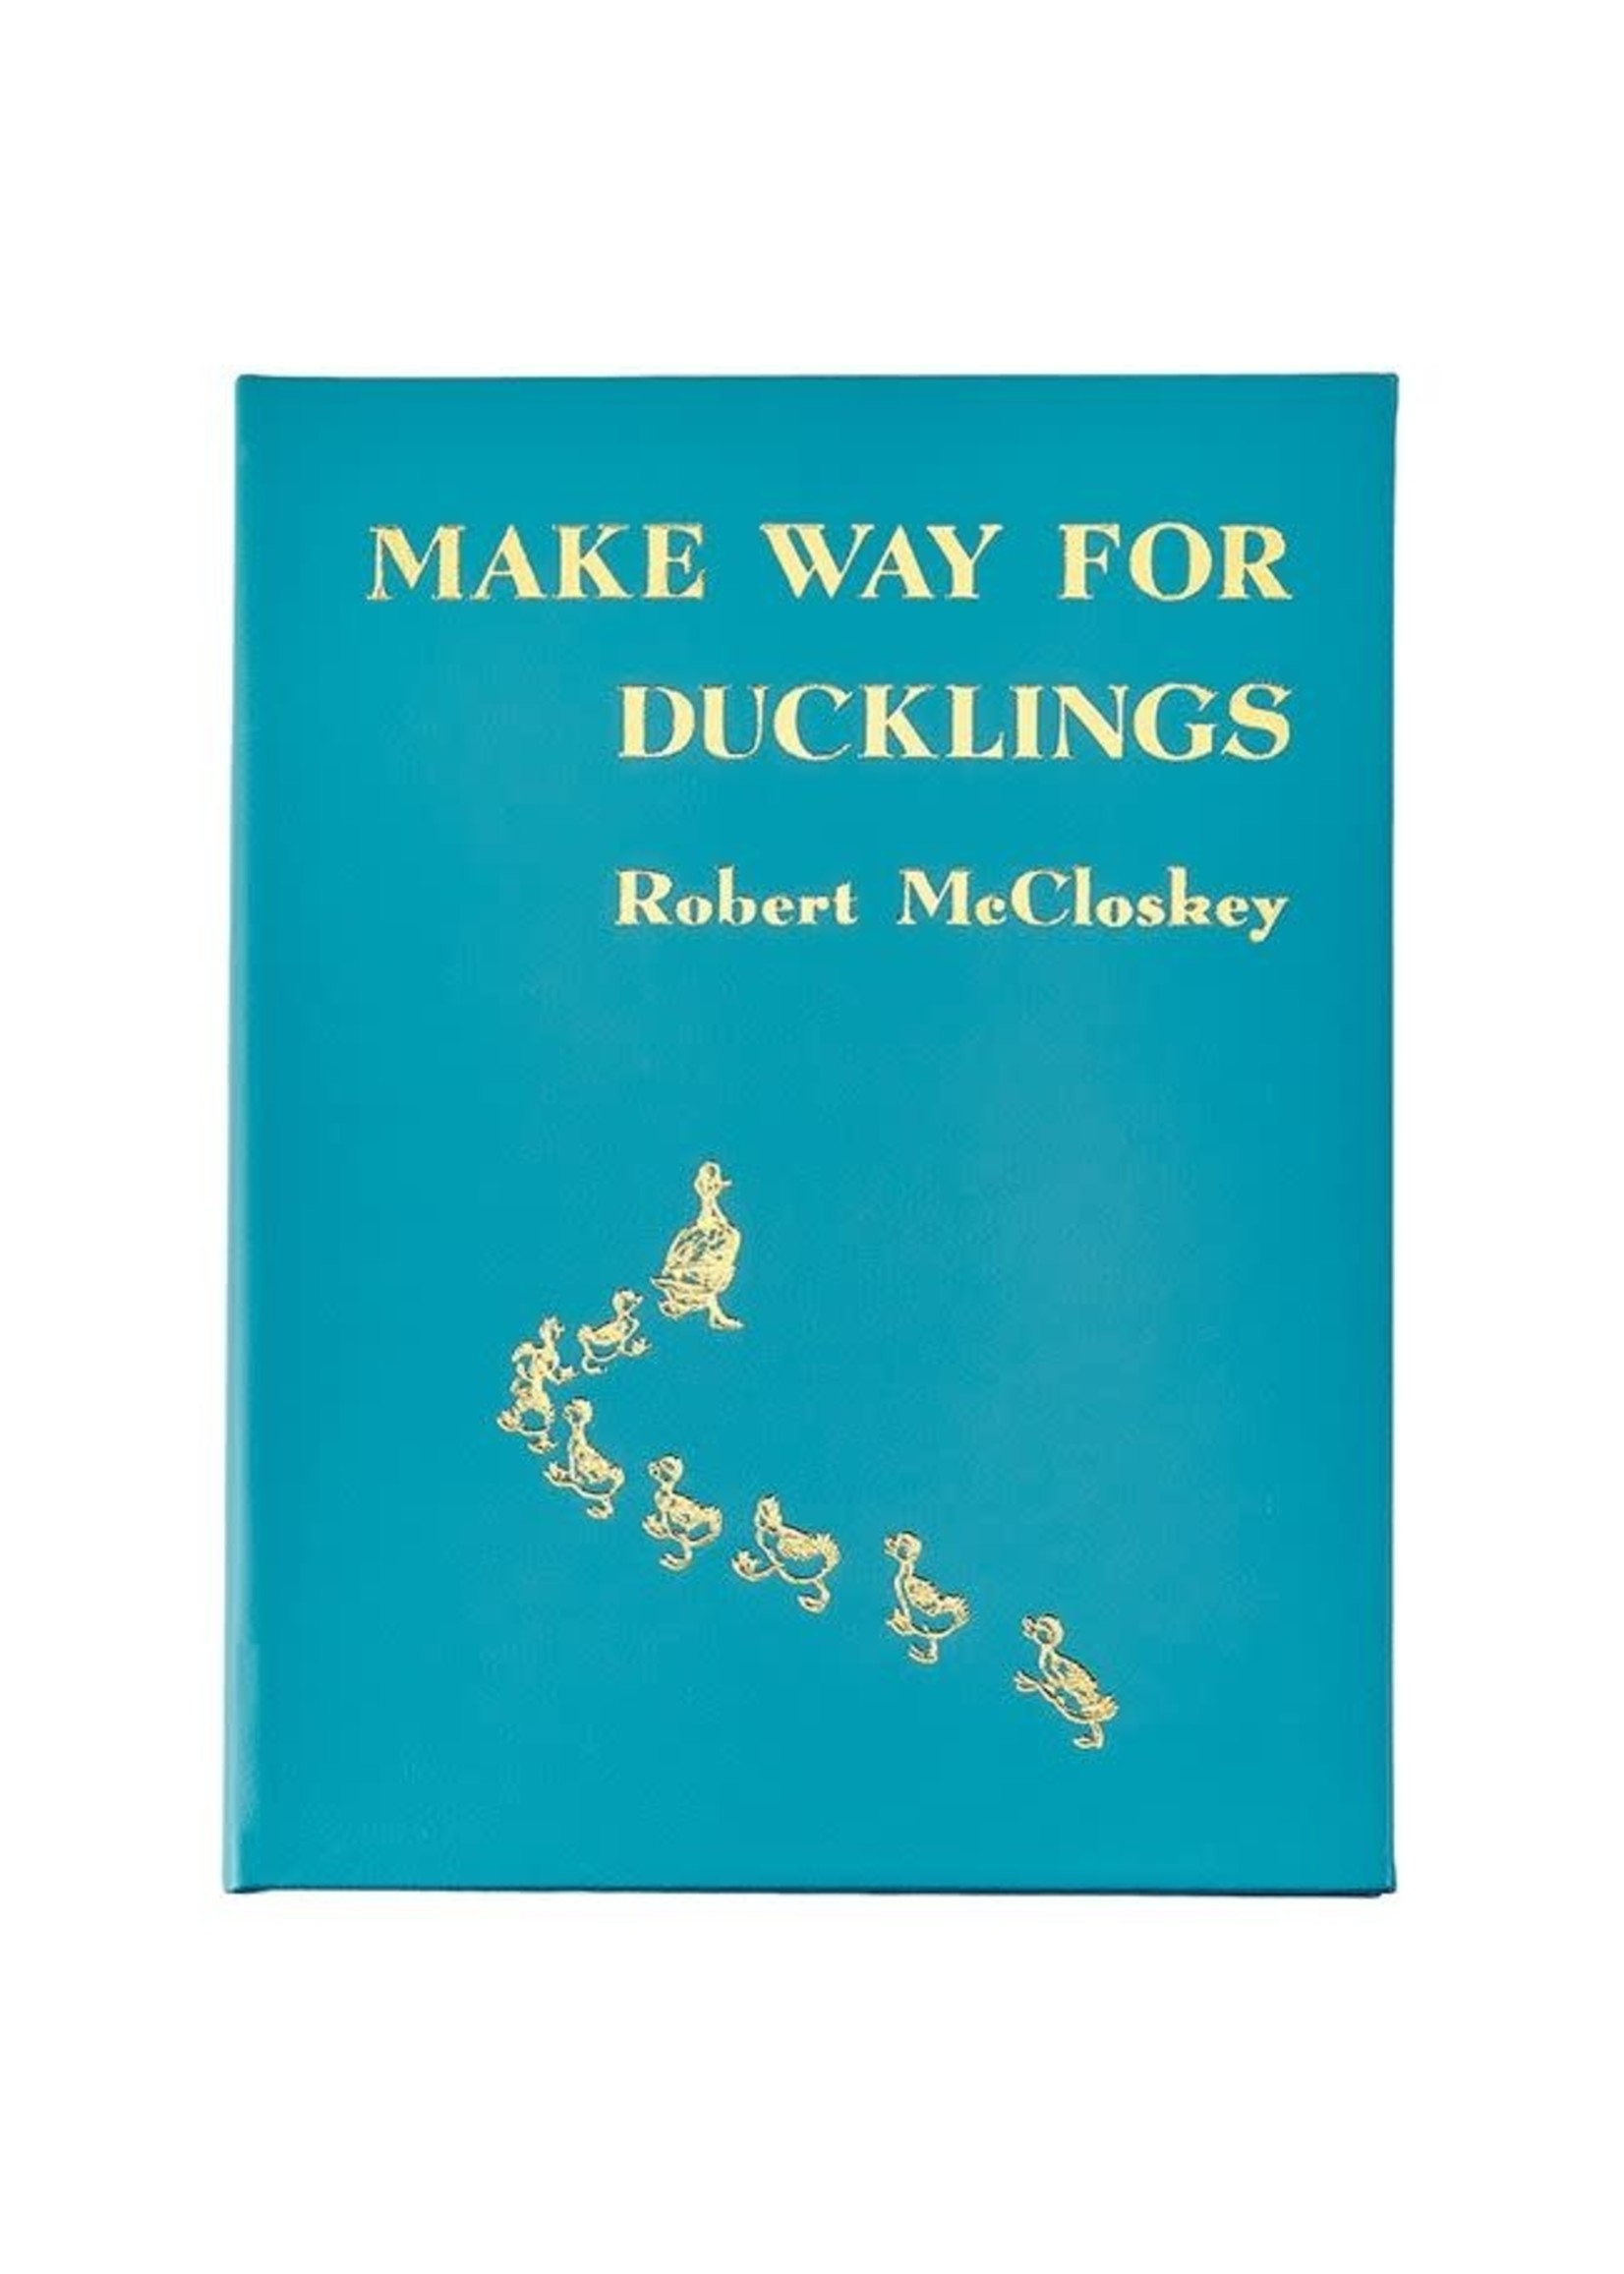 Book - Make Way for Ducklings